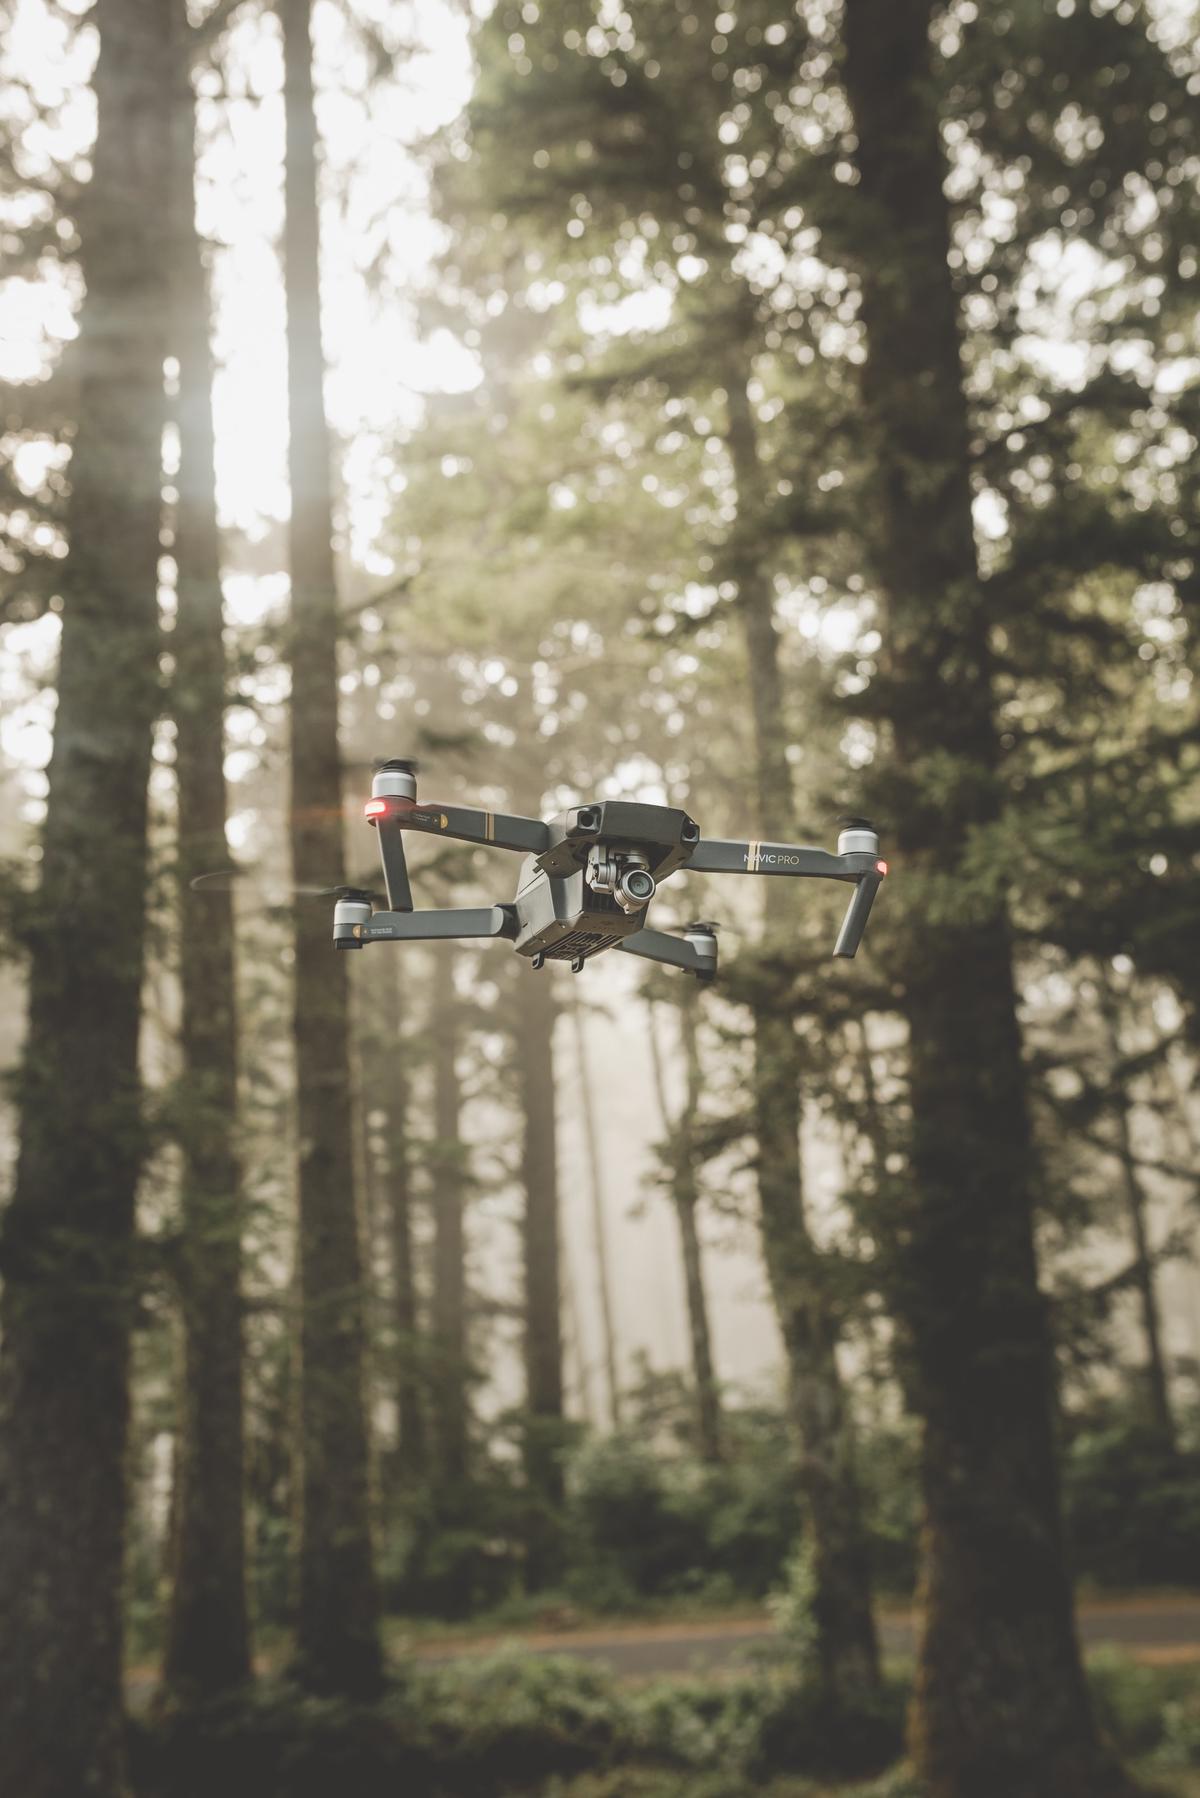 An image showing a DJI drone in flight over a scenic landscape, capturing stunning aerial footage